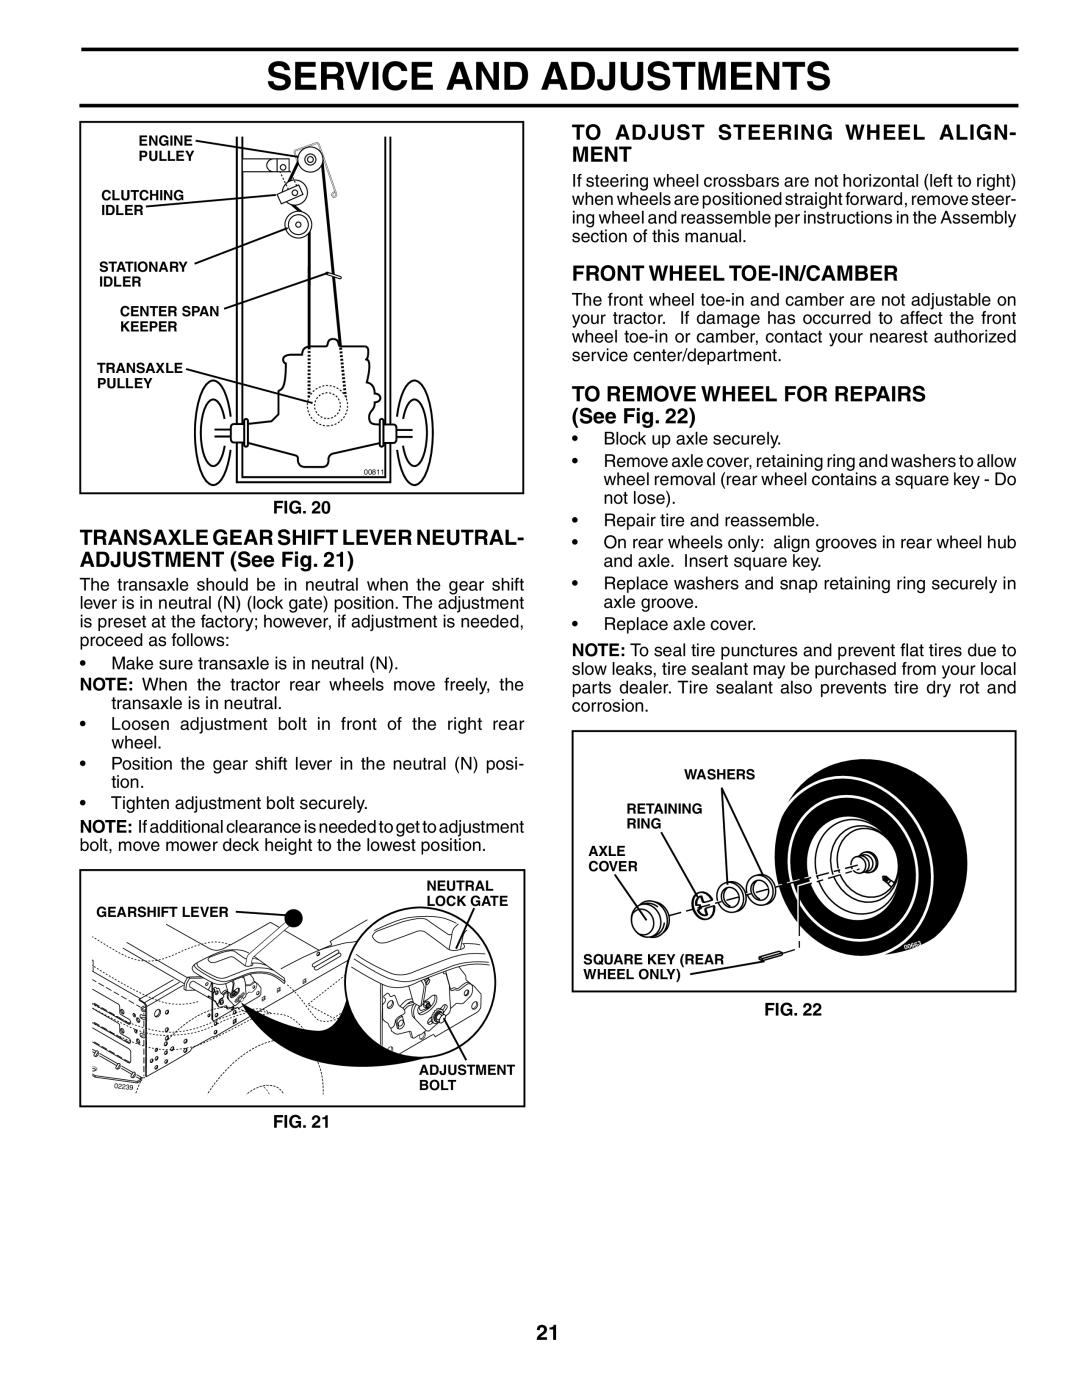 Weed Eater 191064 To Adjust Steering Wheel Align- Ment, Front Wheel Toe-In/Camber, TO REMOVE WHEEL FOR REPAIRS See Fig 